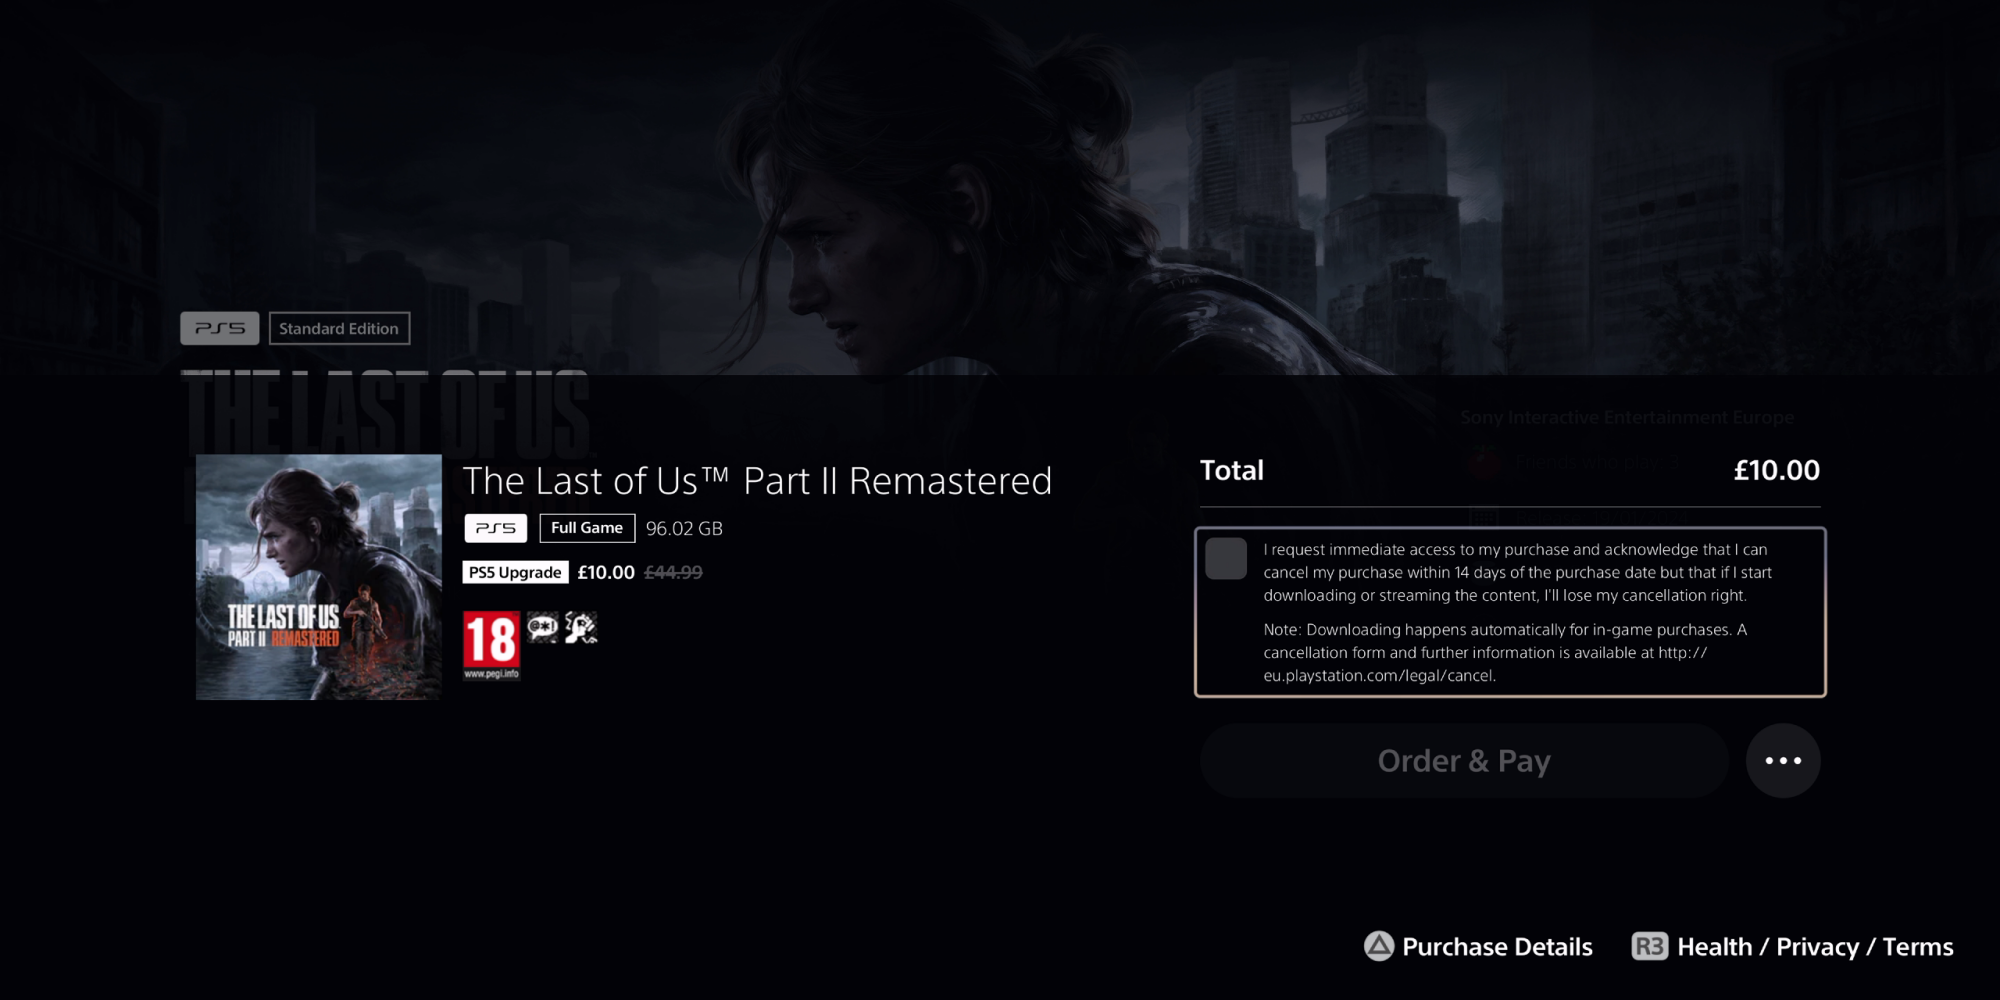 THE LAST OF US PART II REMASTERED